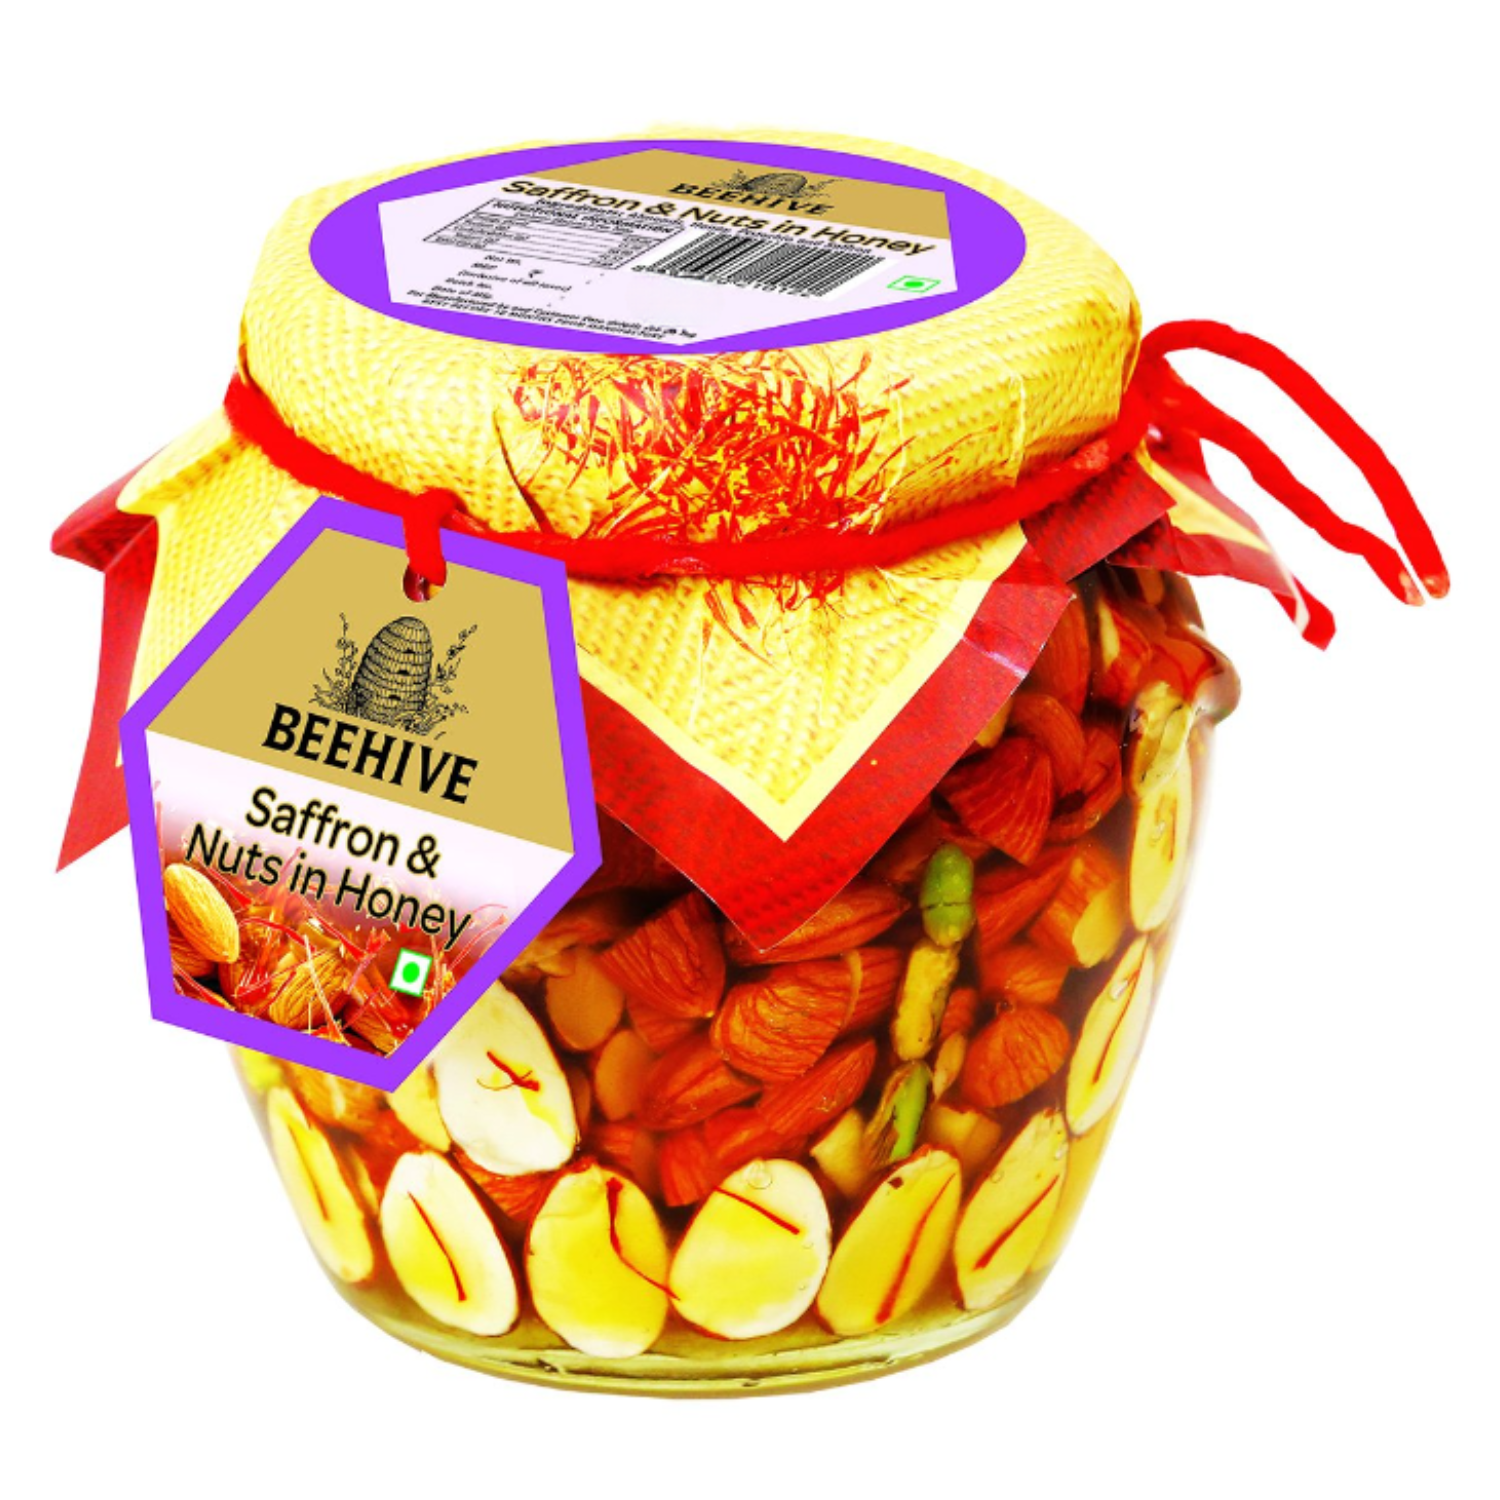 Beehive Saffron and Nuts Honey